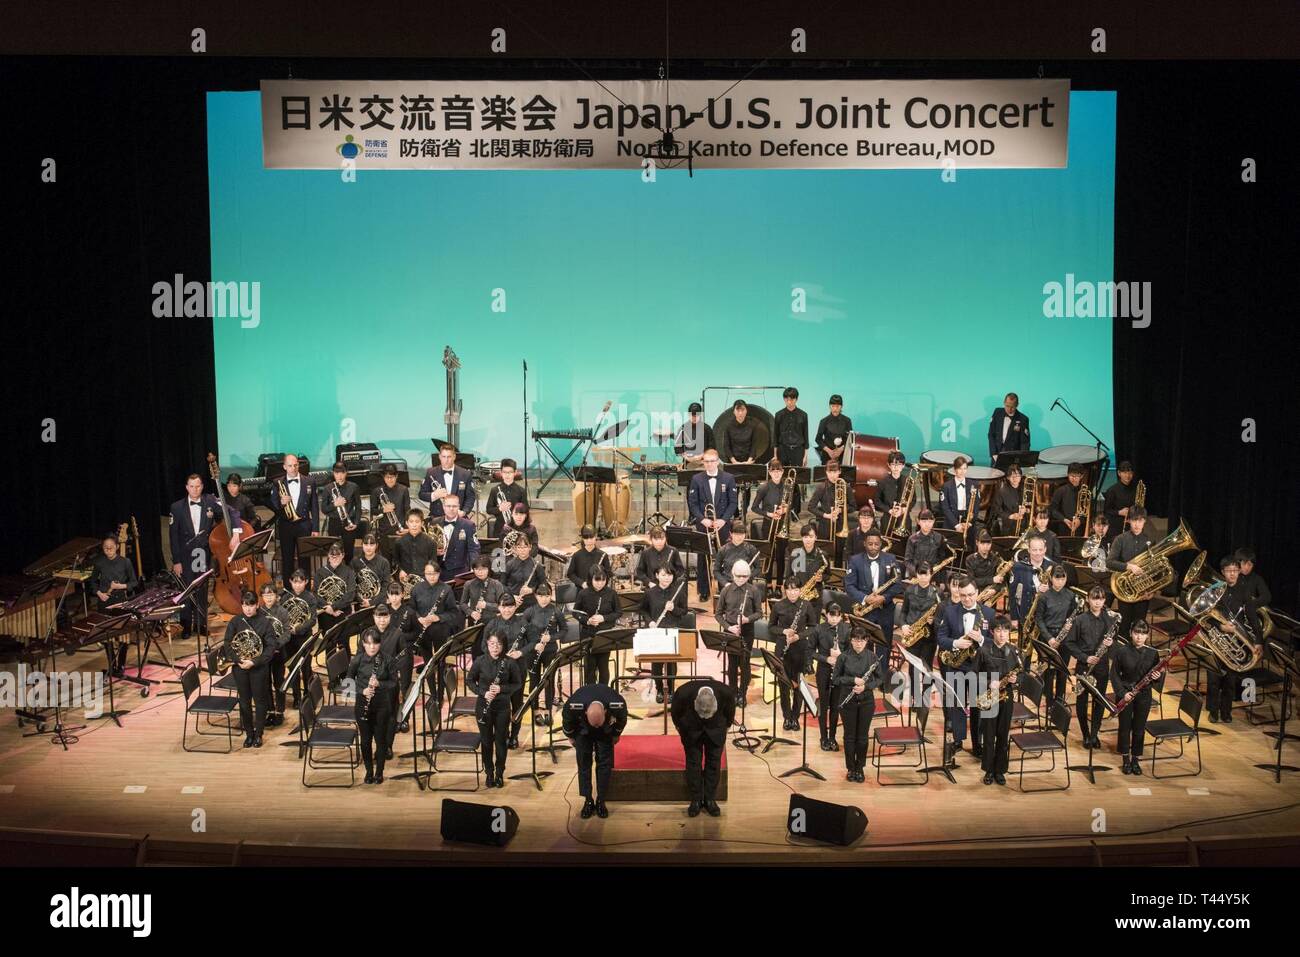 The conductors take a bow at the conclusion of the Japan-U.S. Joint Concert Feb. 24, 2019, at the Hamura Learning Center in Hamura, Tokyo, Japan. Members of the USAF Band of the Pacific and the Hamura Daiichi Jr. High School Band mixed and played as one for the event. Stock Photo